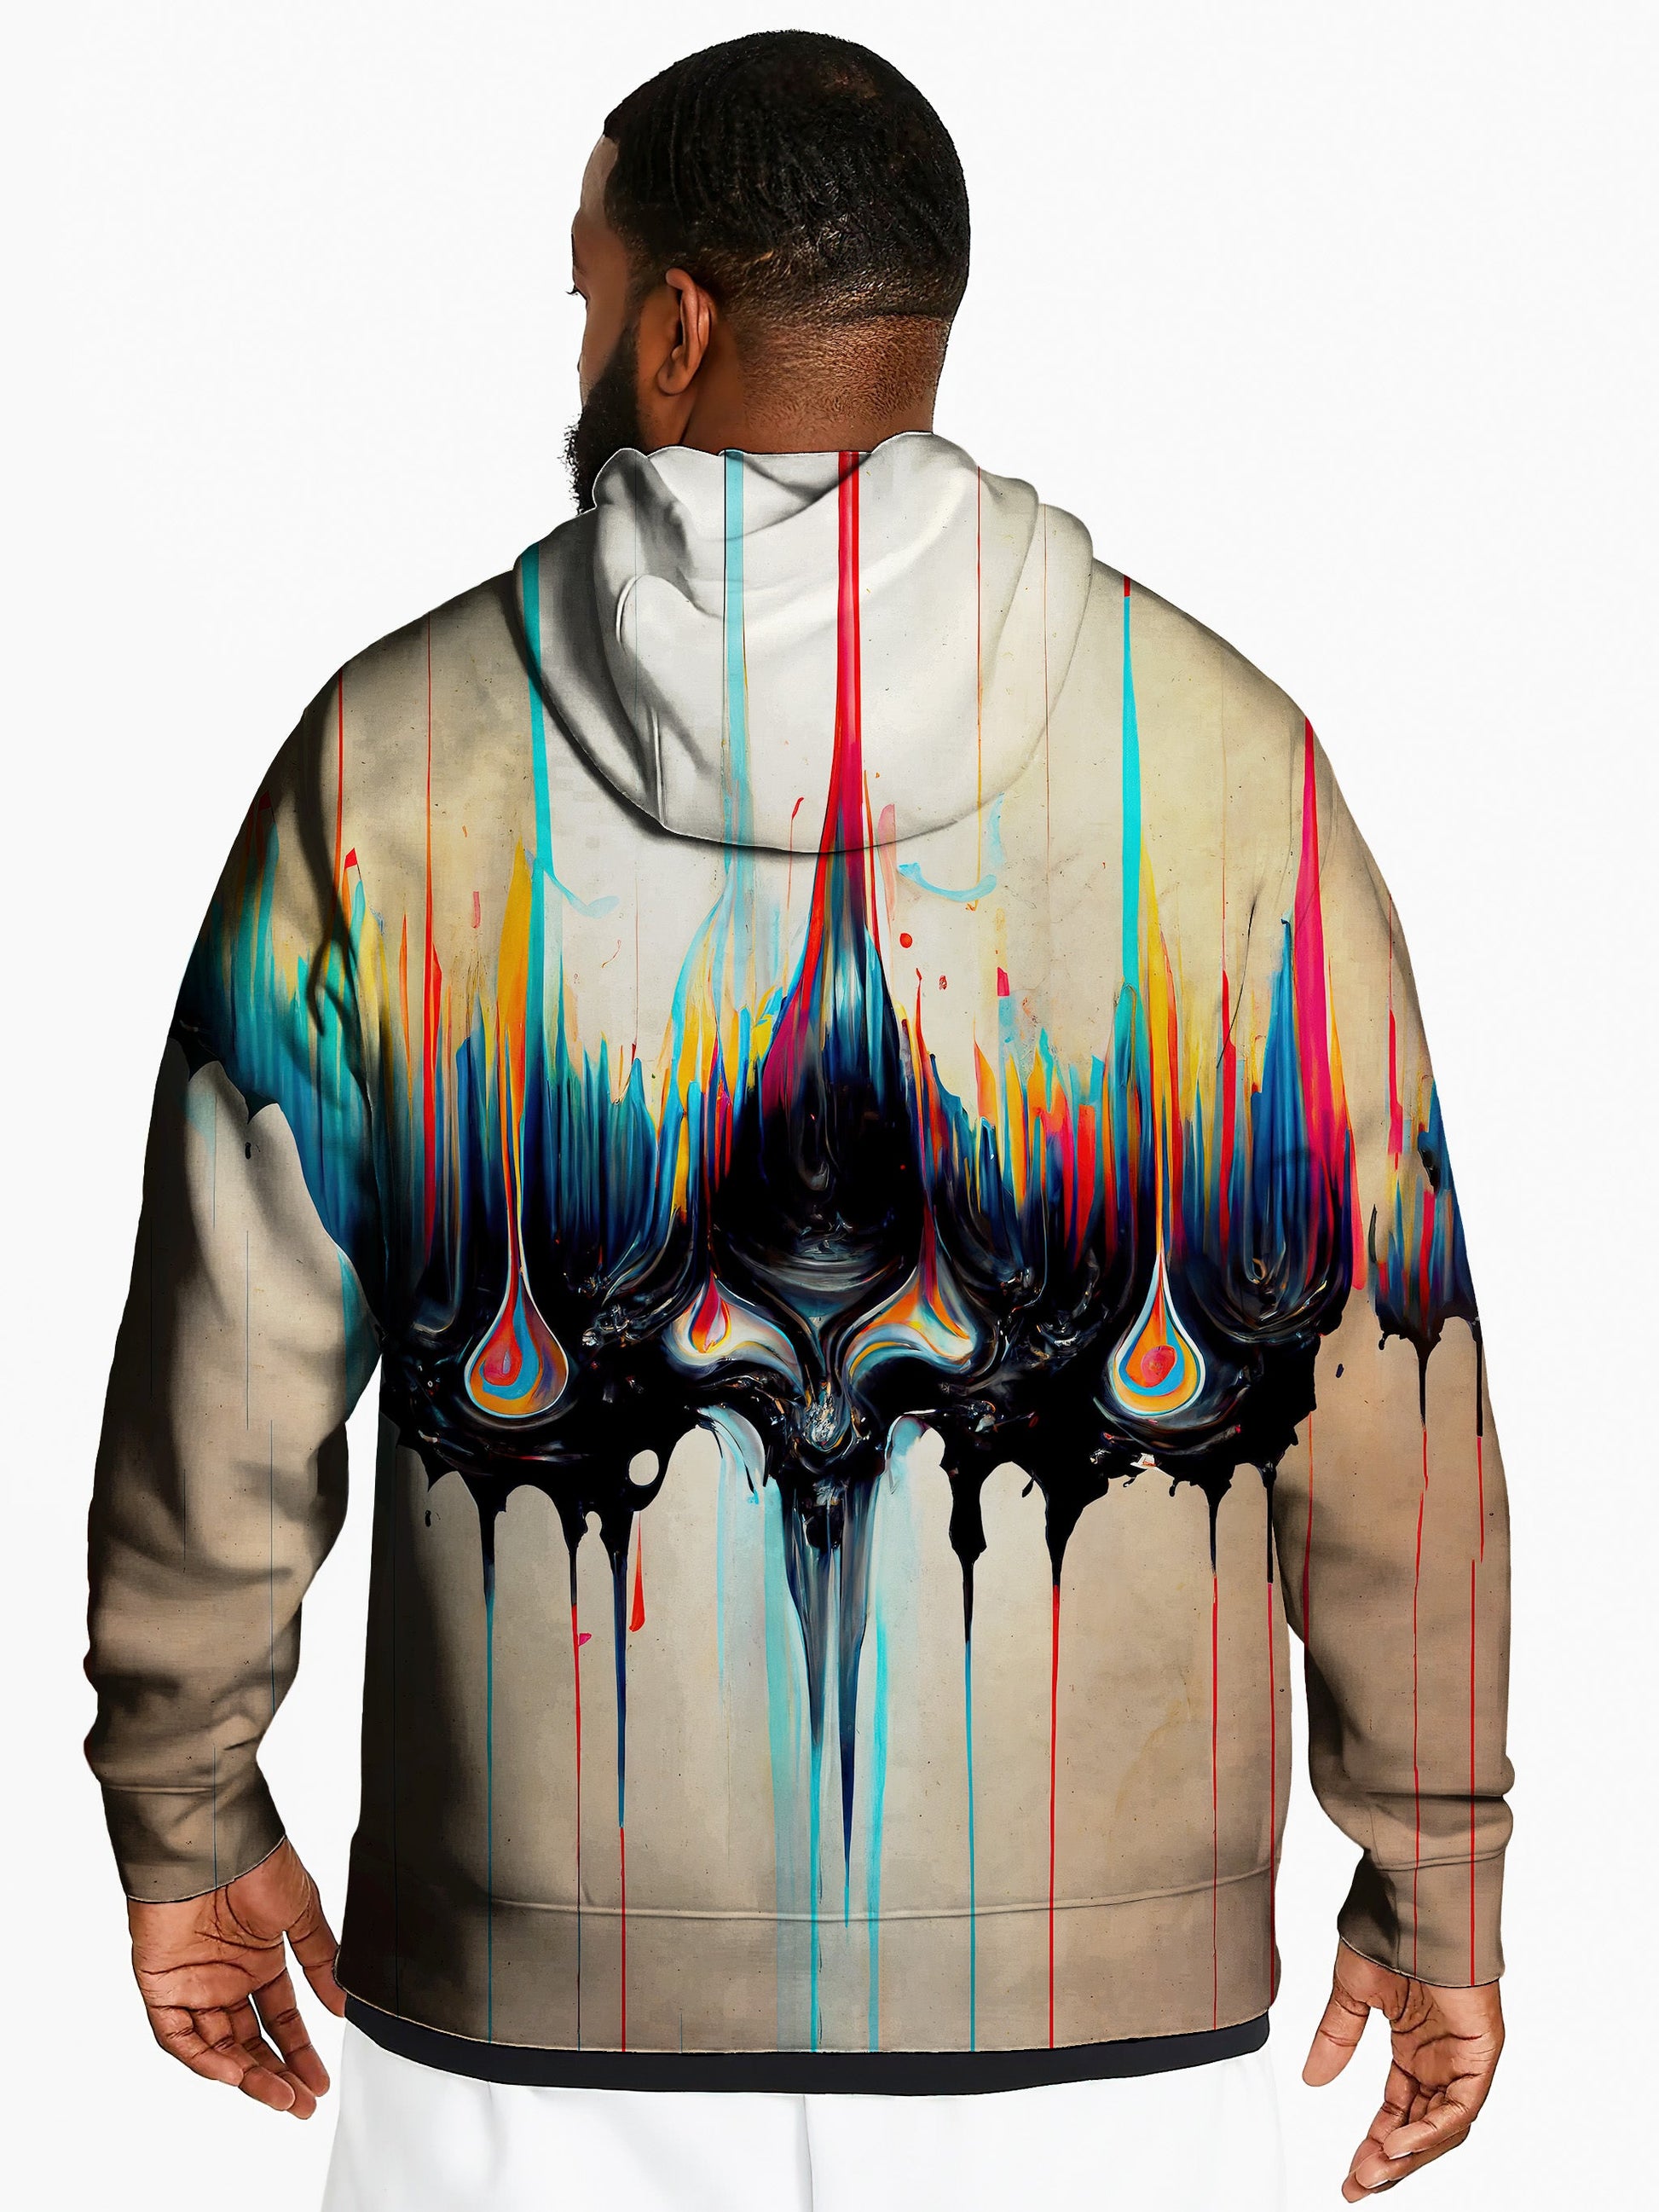 Equable Impact Unisex Pullover Hoodie - EDM Festival Clothing - Boogie Threads